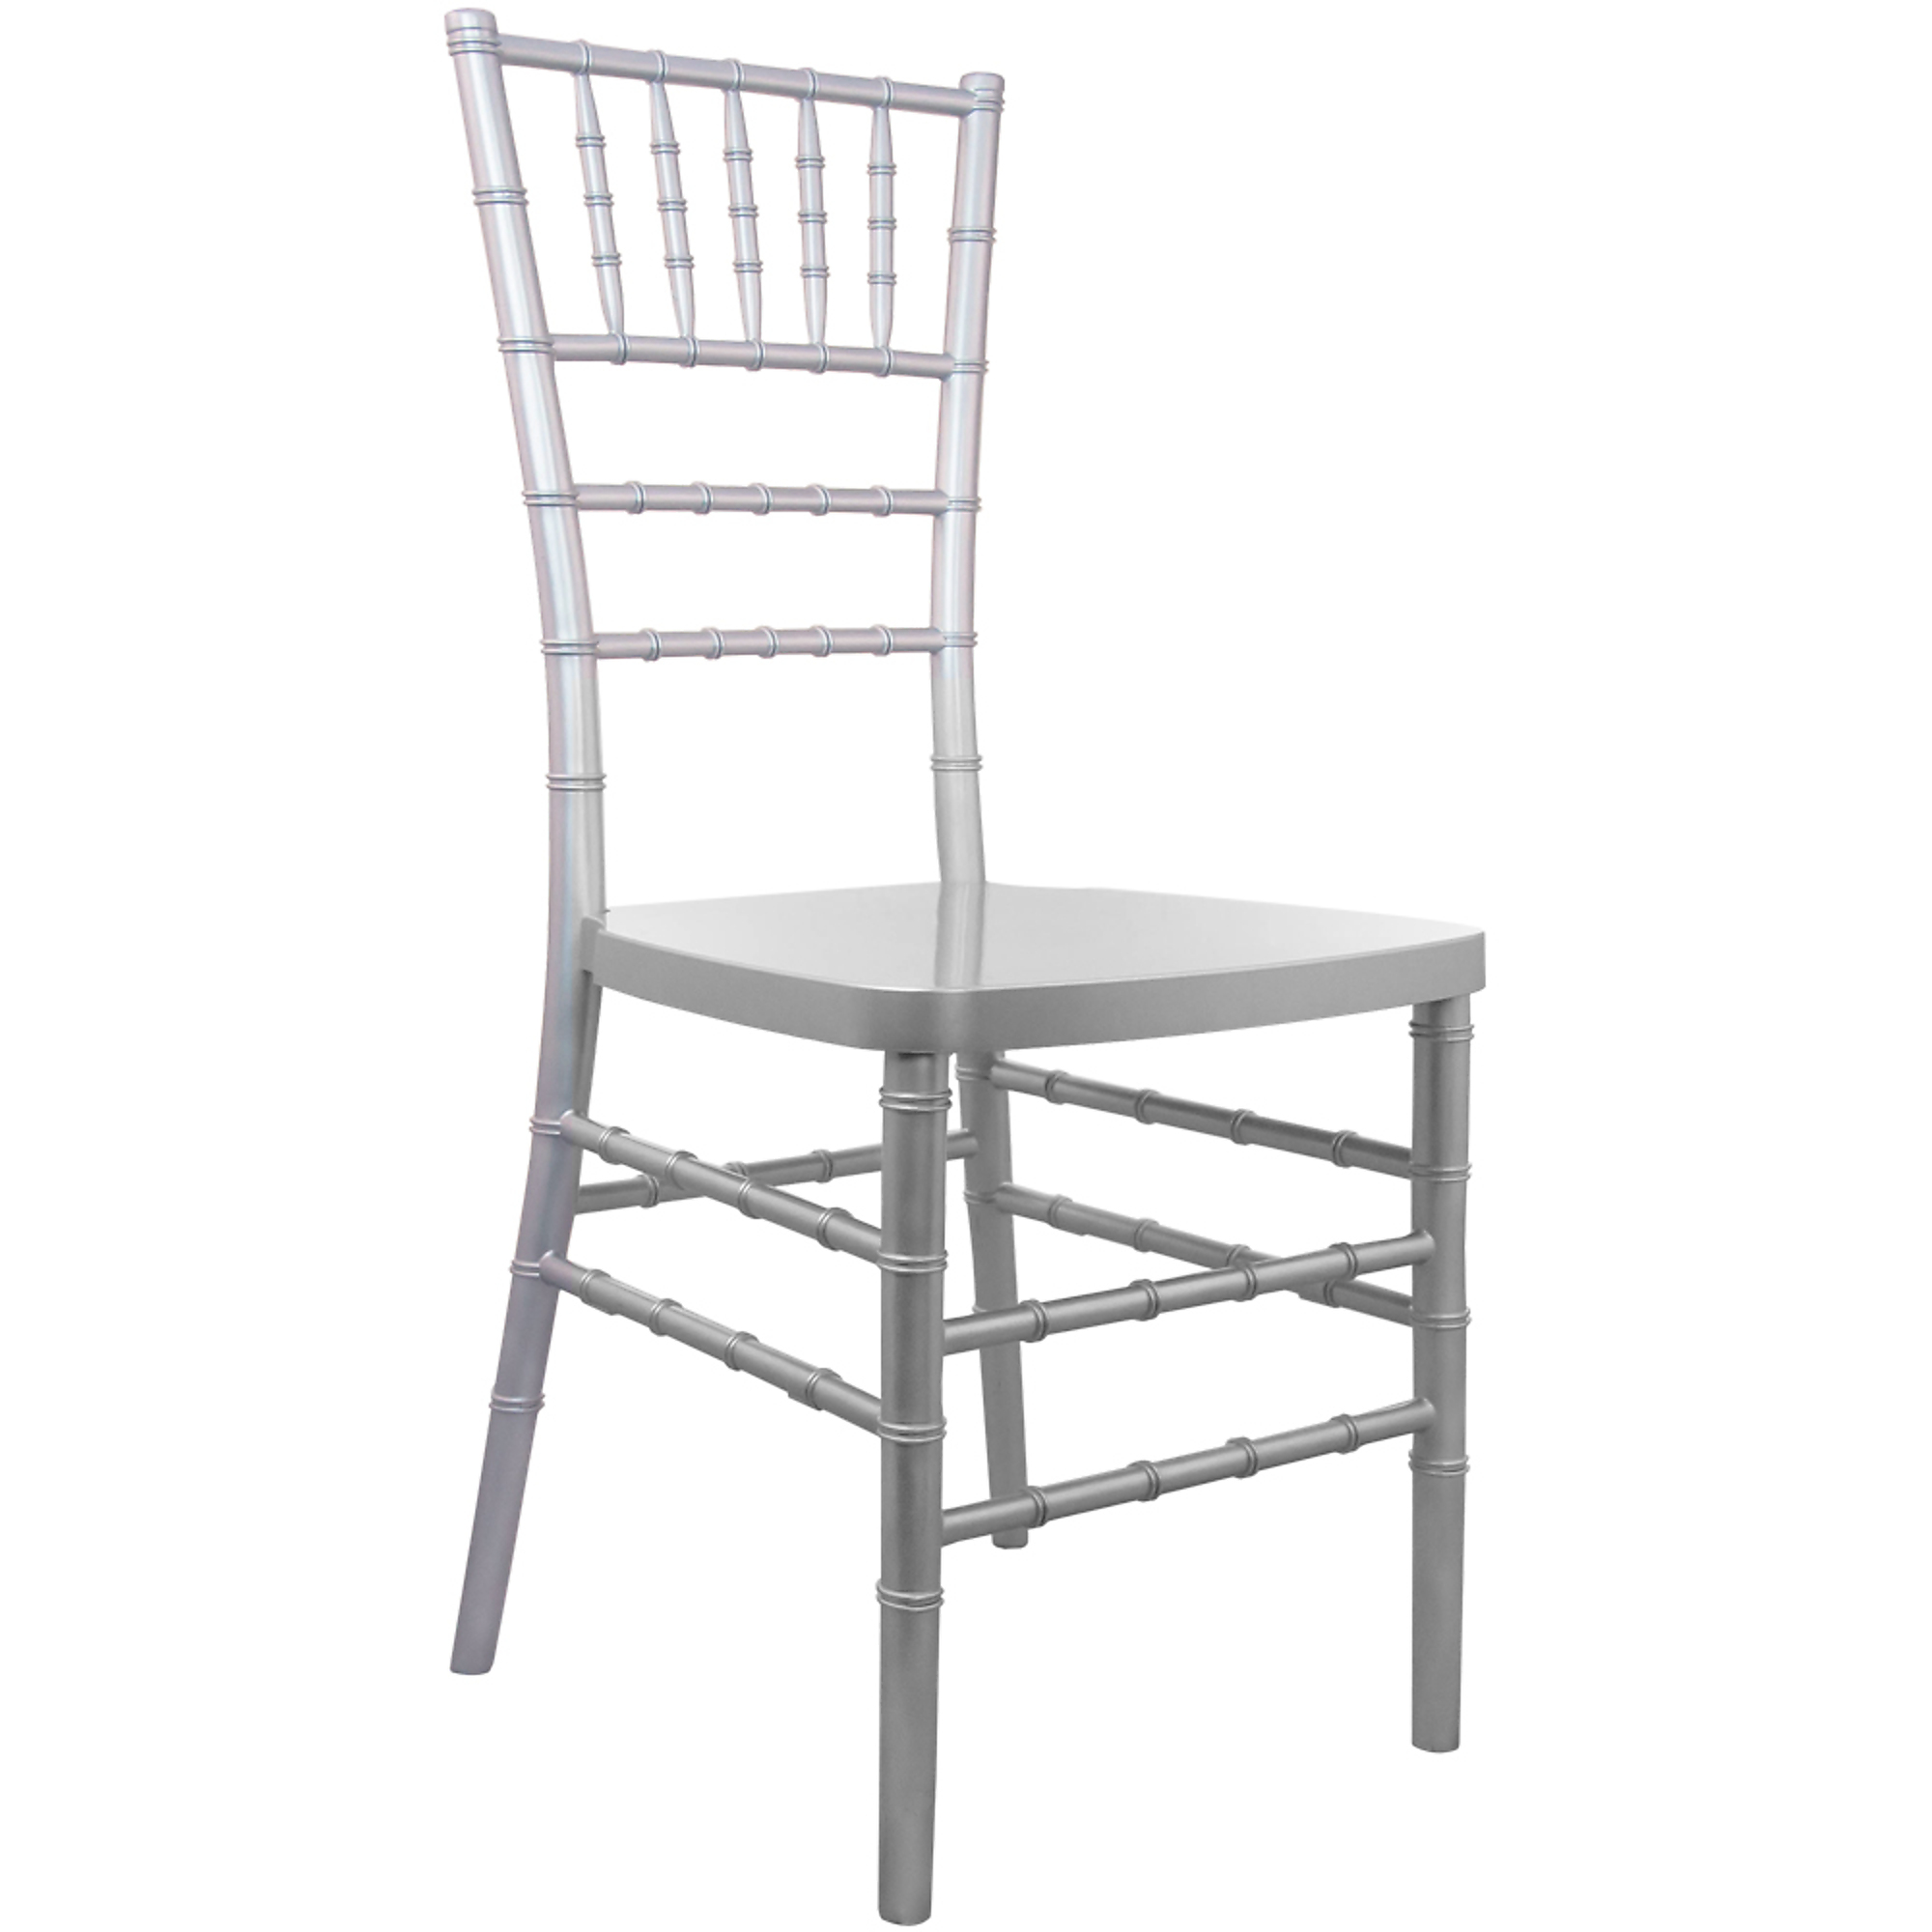 Flash Furniture, Silver Resin Chiavari Chair, Primary Color Gray, Included (qty.) 1, Model RSCHIS